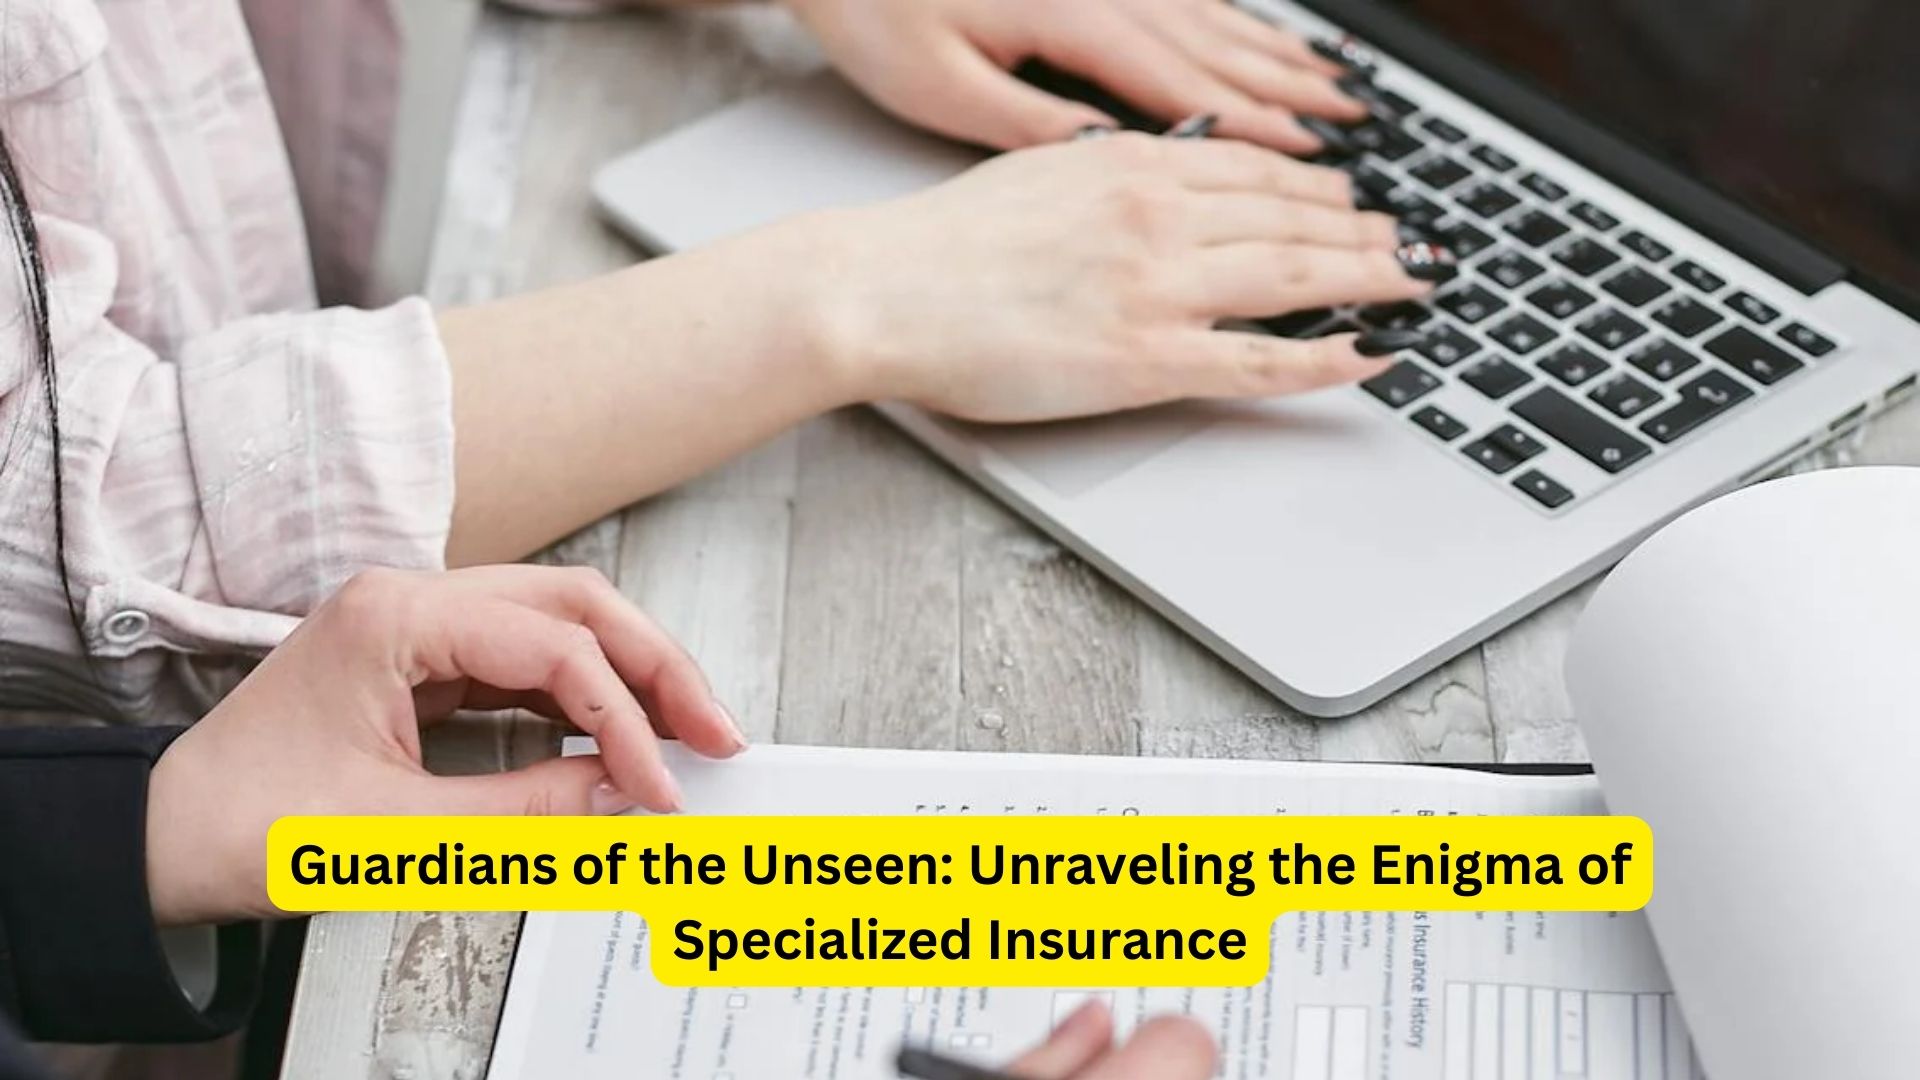 Guardians of the Unseen: Unraveling the Enigma of Specialized Insurance